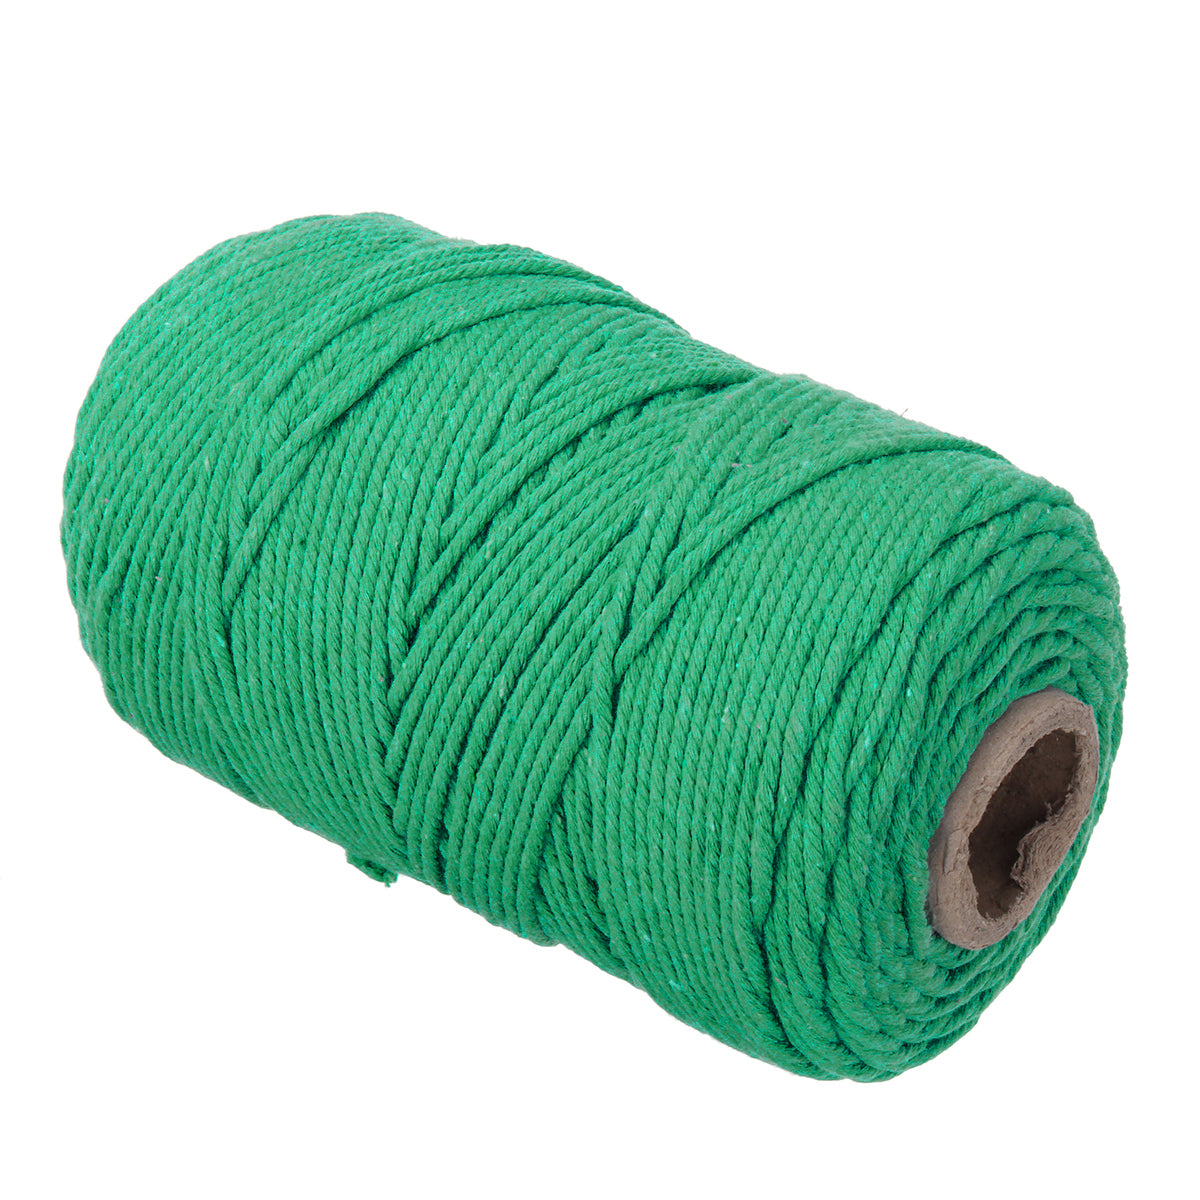 200M 3mm 100% Natural Cotton Twisted Cord Crafts DIY Macrame String Decorations